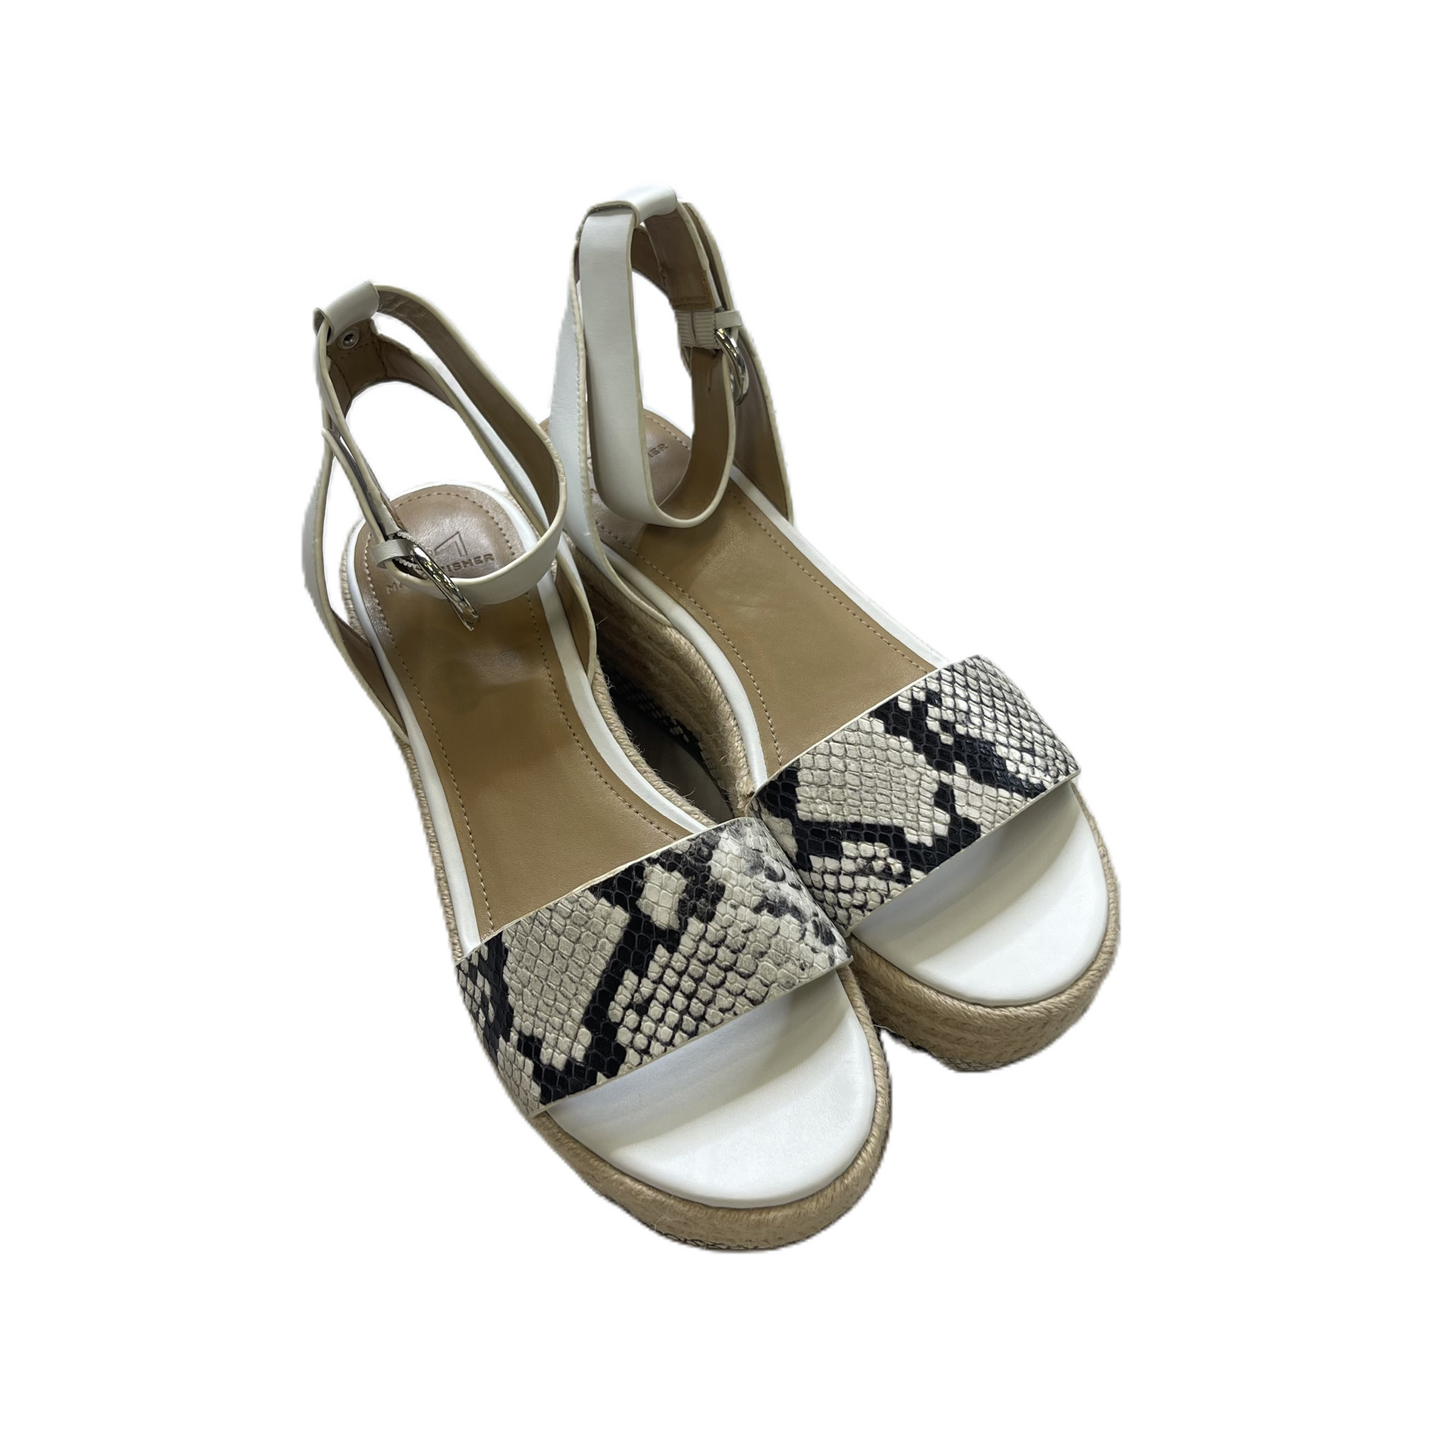 White Sandals Heels Wedge By Marc Fisher, Size: 9